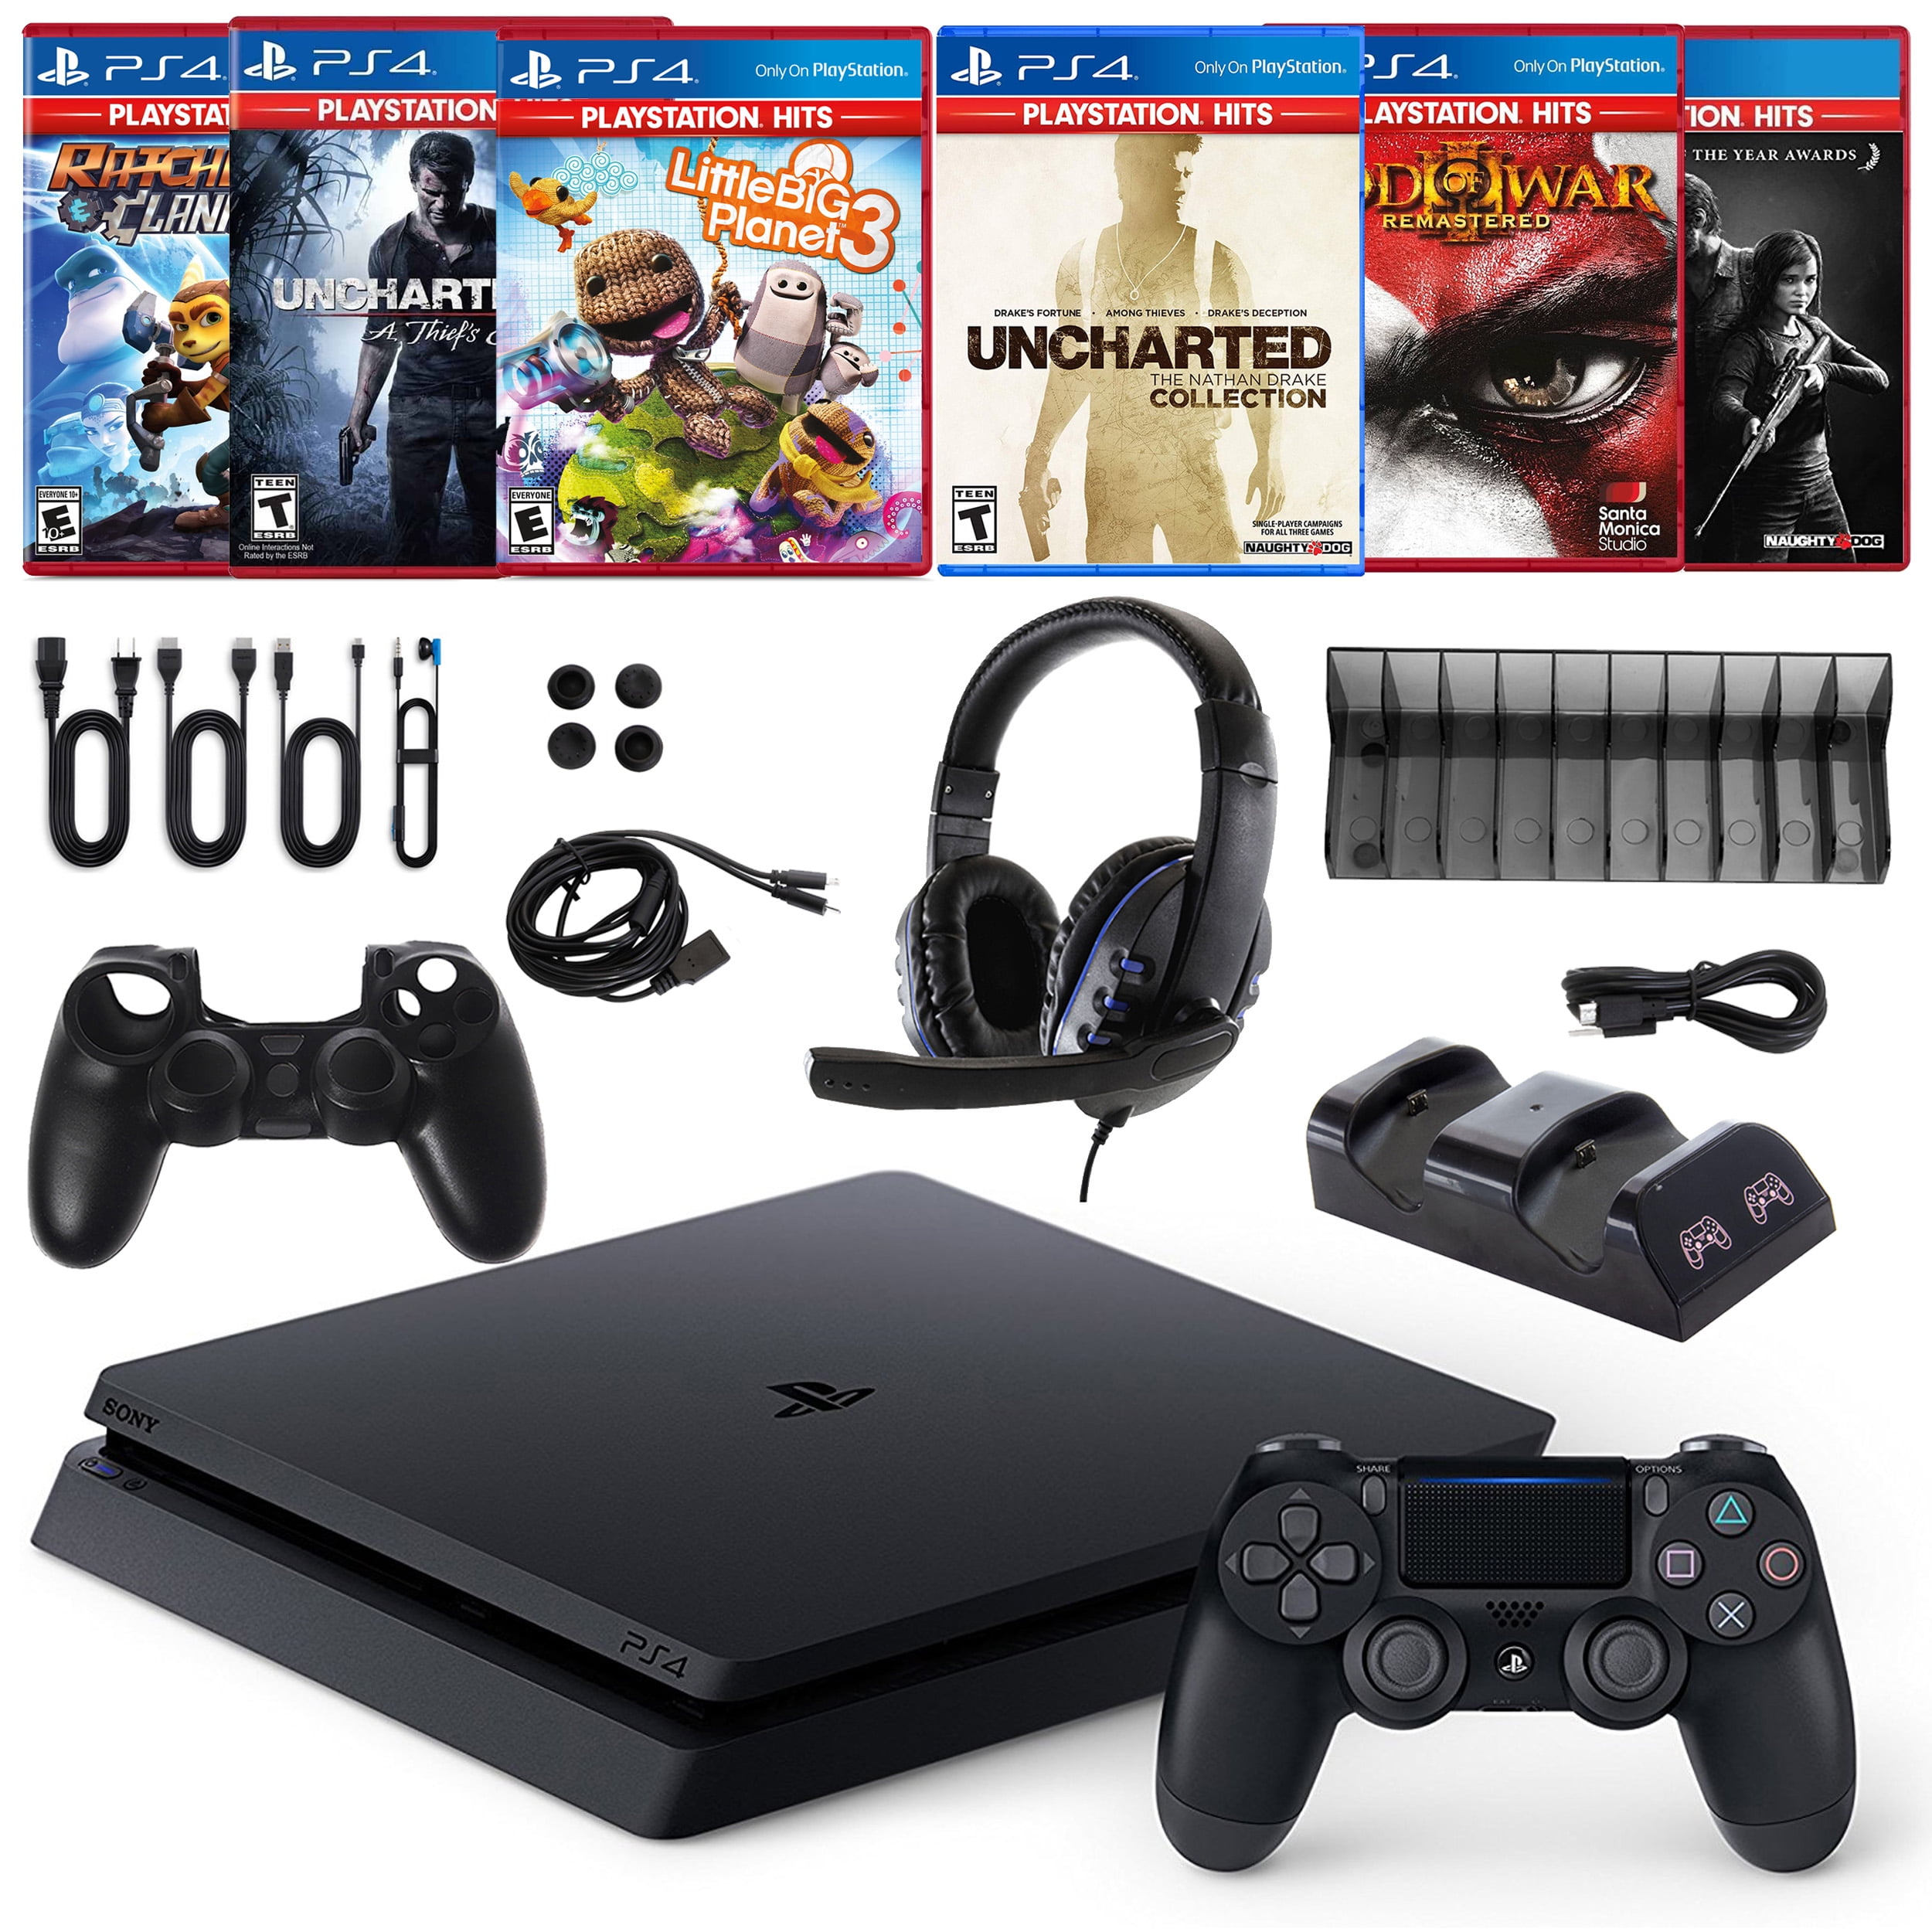 PS4 Slim 1TB Console with 6 Games and Accessories Kit